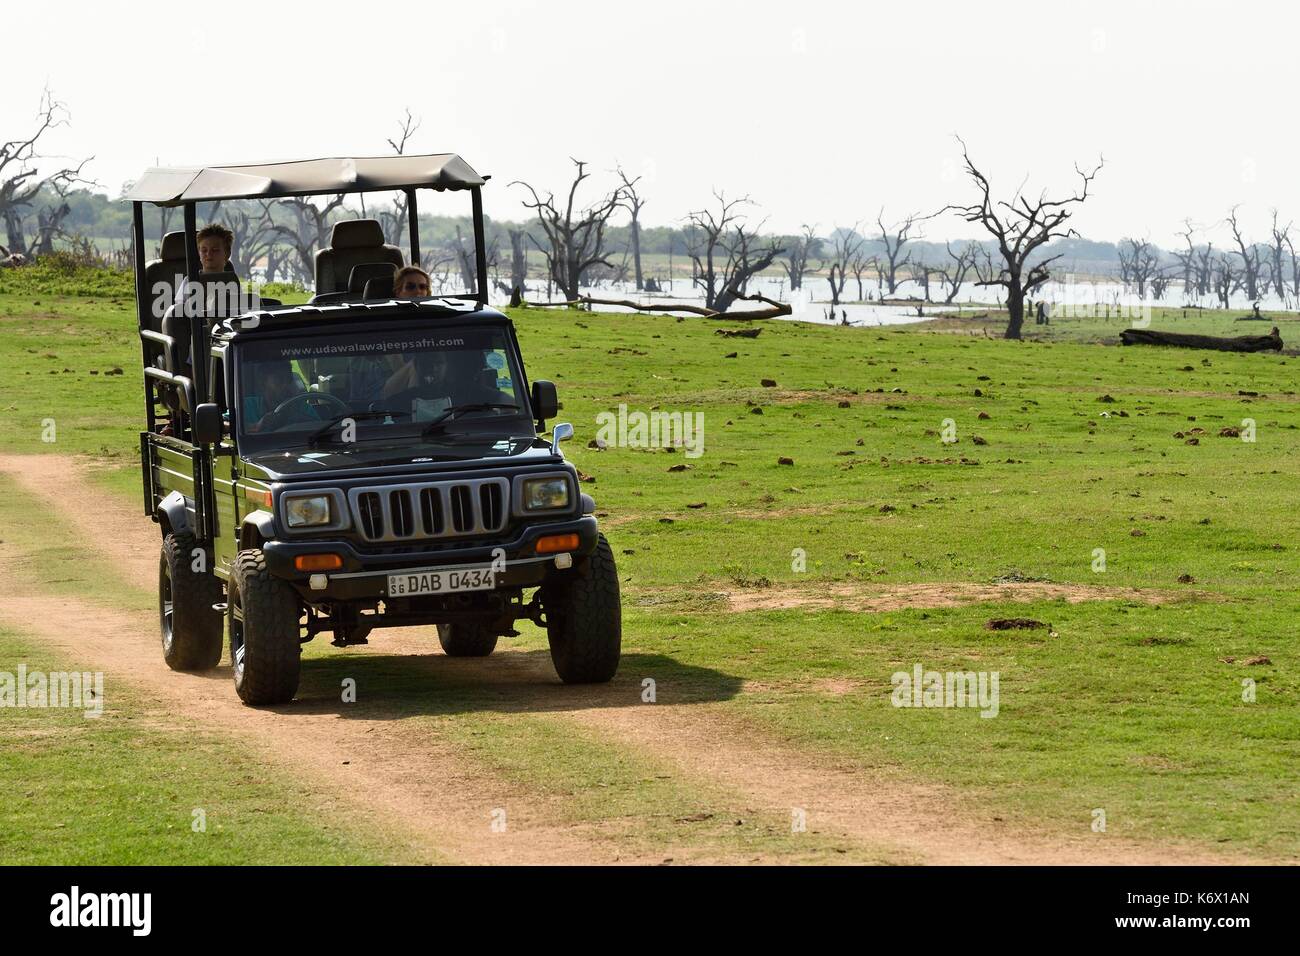 Sri Lanka, Uva province, Udawalawe National Park, safari in a four wheel drive, the dead trees in the background are submerged under water during the monsoon rains Stock Photo